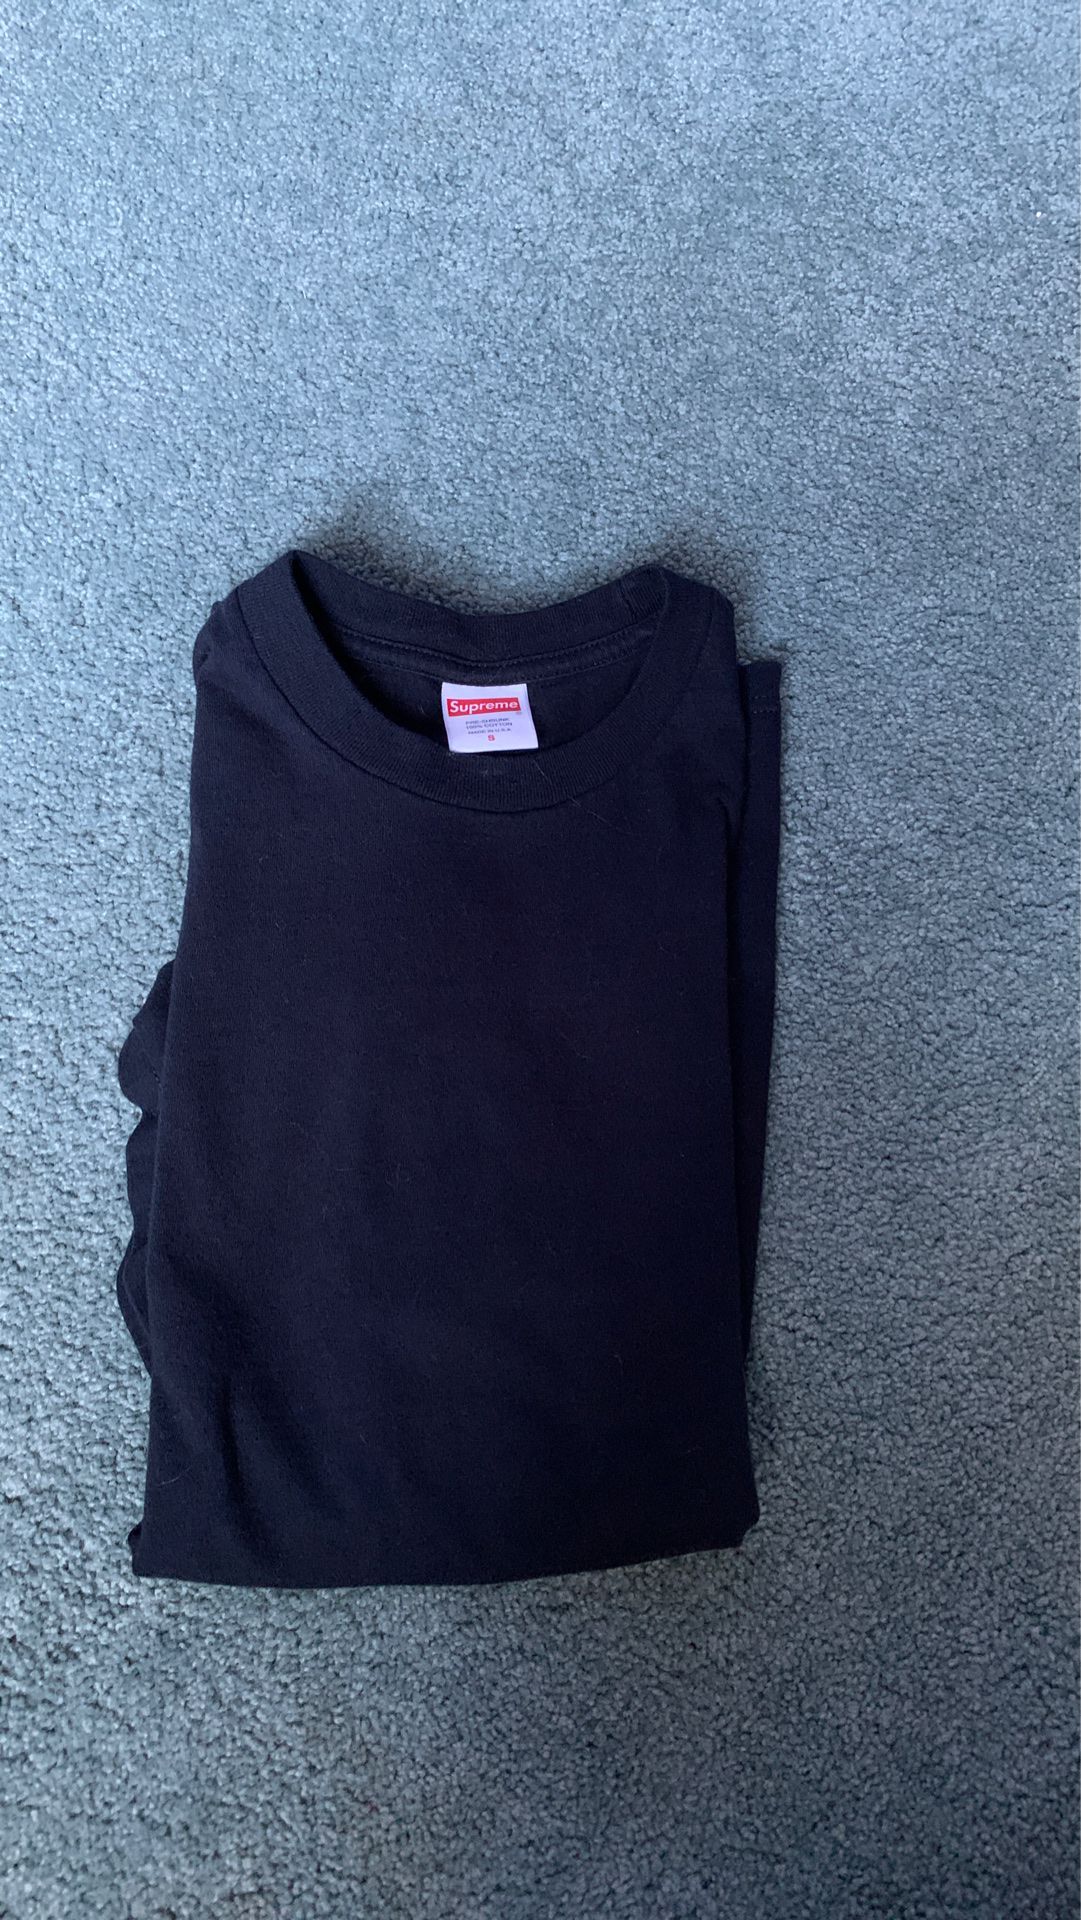 Blank supreme tee navy size small